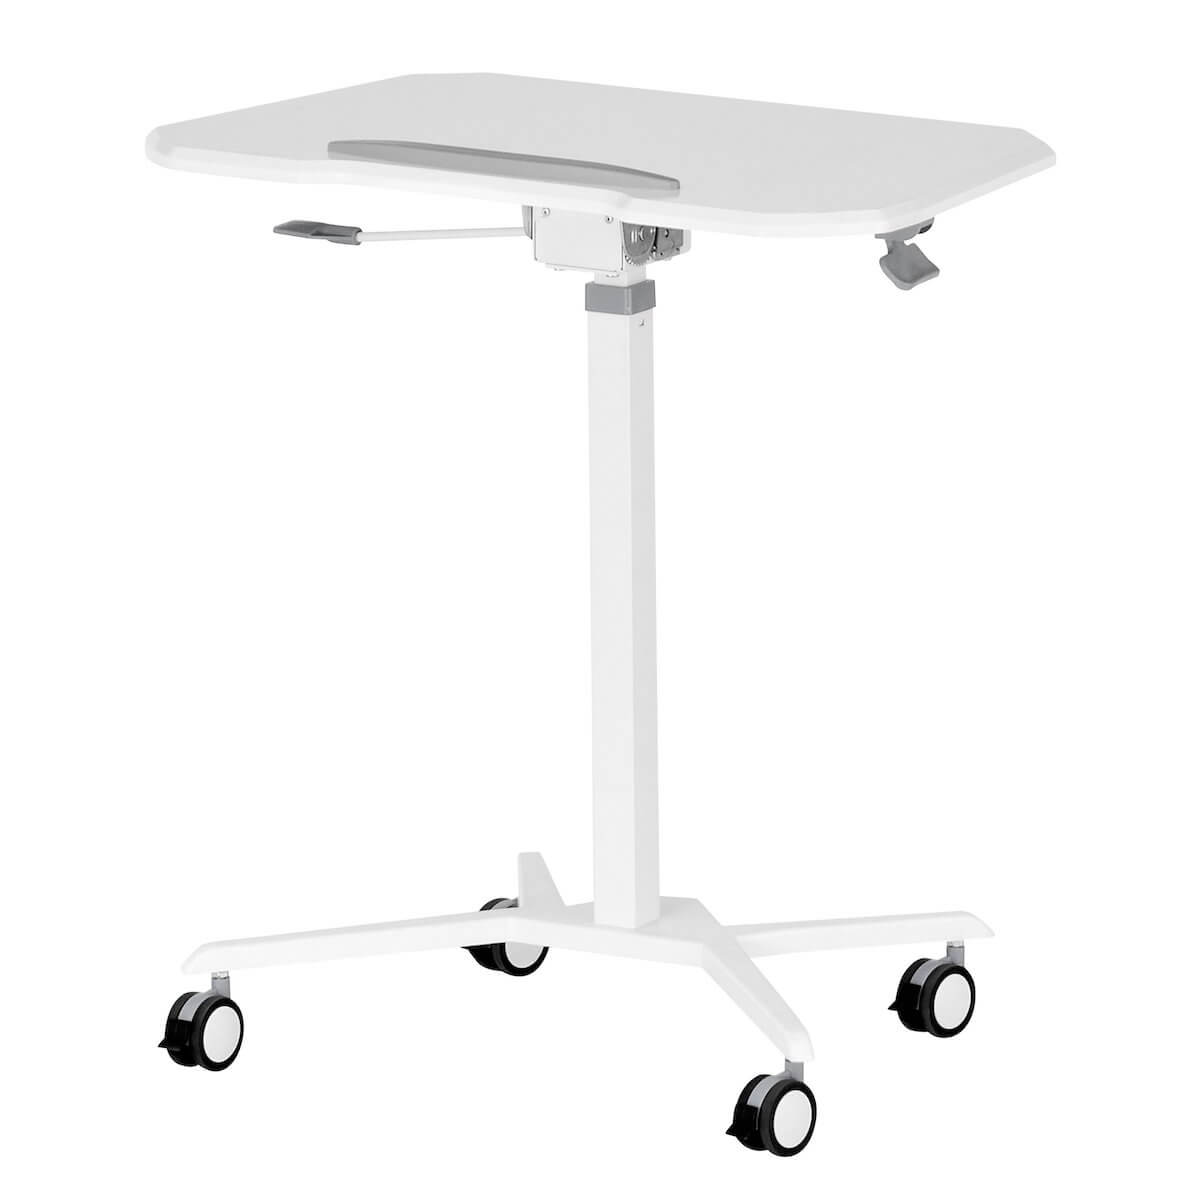 Techni Mobili White Sit to Stand Mobile Laptop Computer Stand with Height Adjustable and Tiltable Tabletop RTA-B008-WHT Back